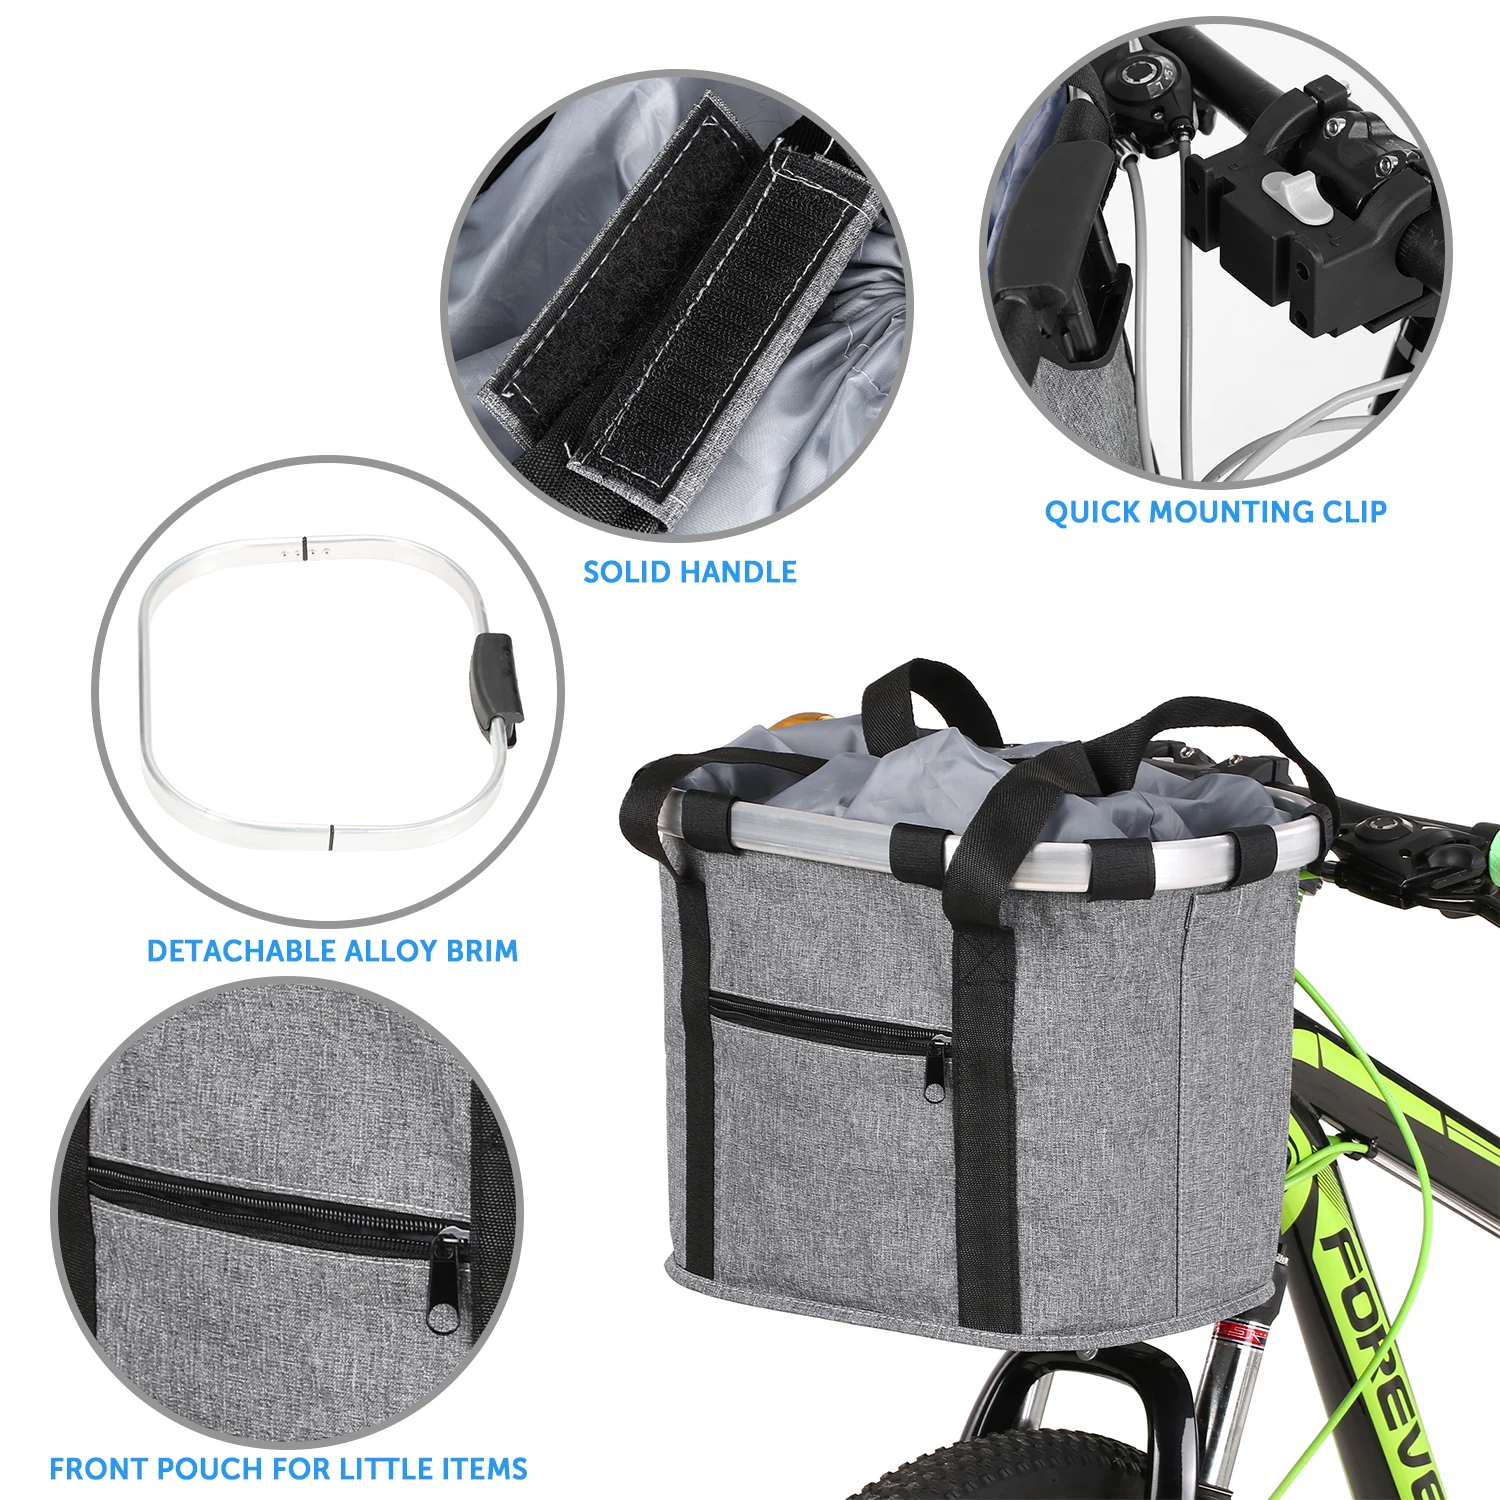 Bicycle Basket Front Bag Pet Carrier Cycling Pouch Bike Pannier Baggage Holder